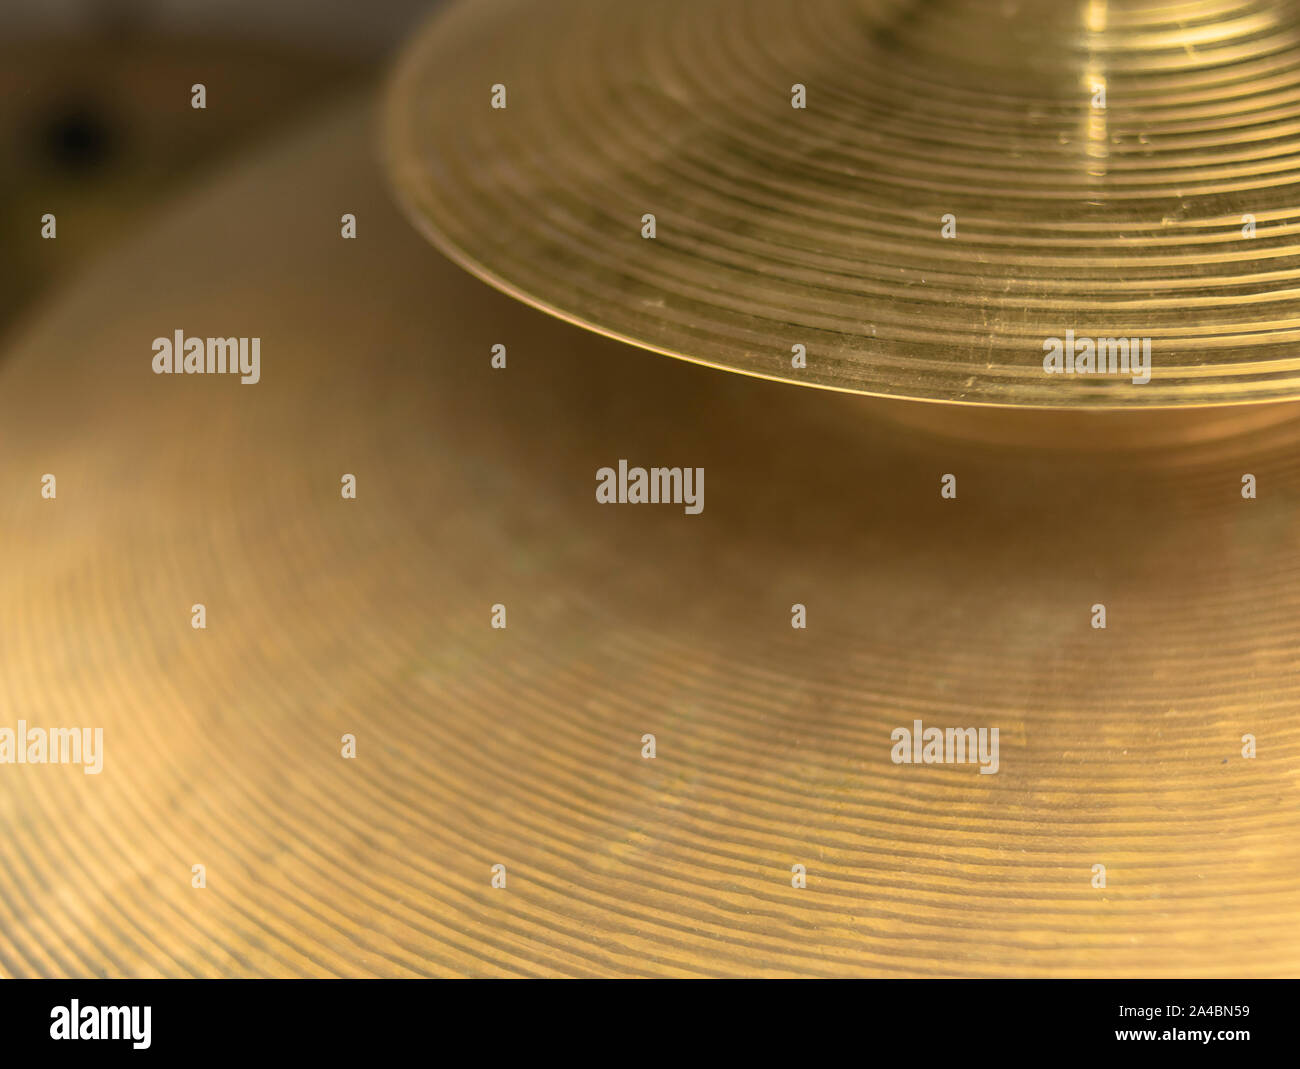 Splash and crash plates of a drum, both bright and golden, hammered and with grooves for sound diffusion Stock Photo